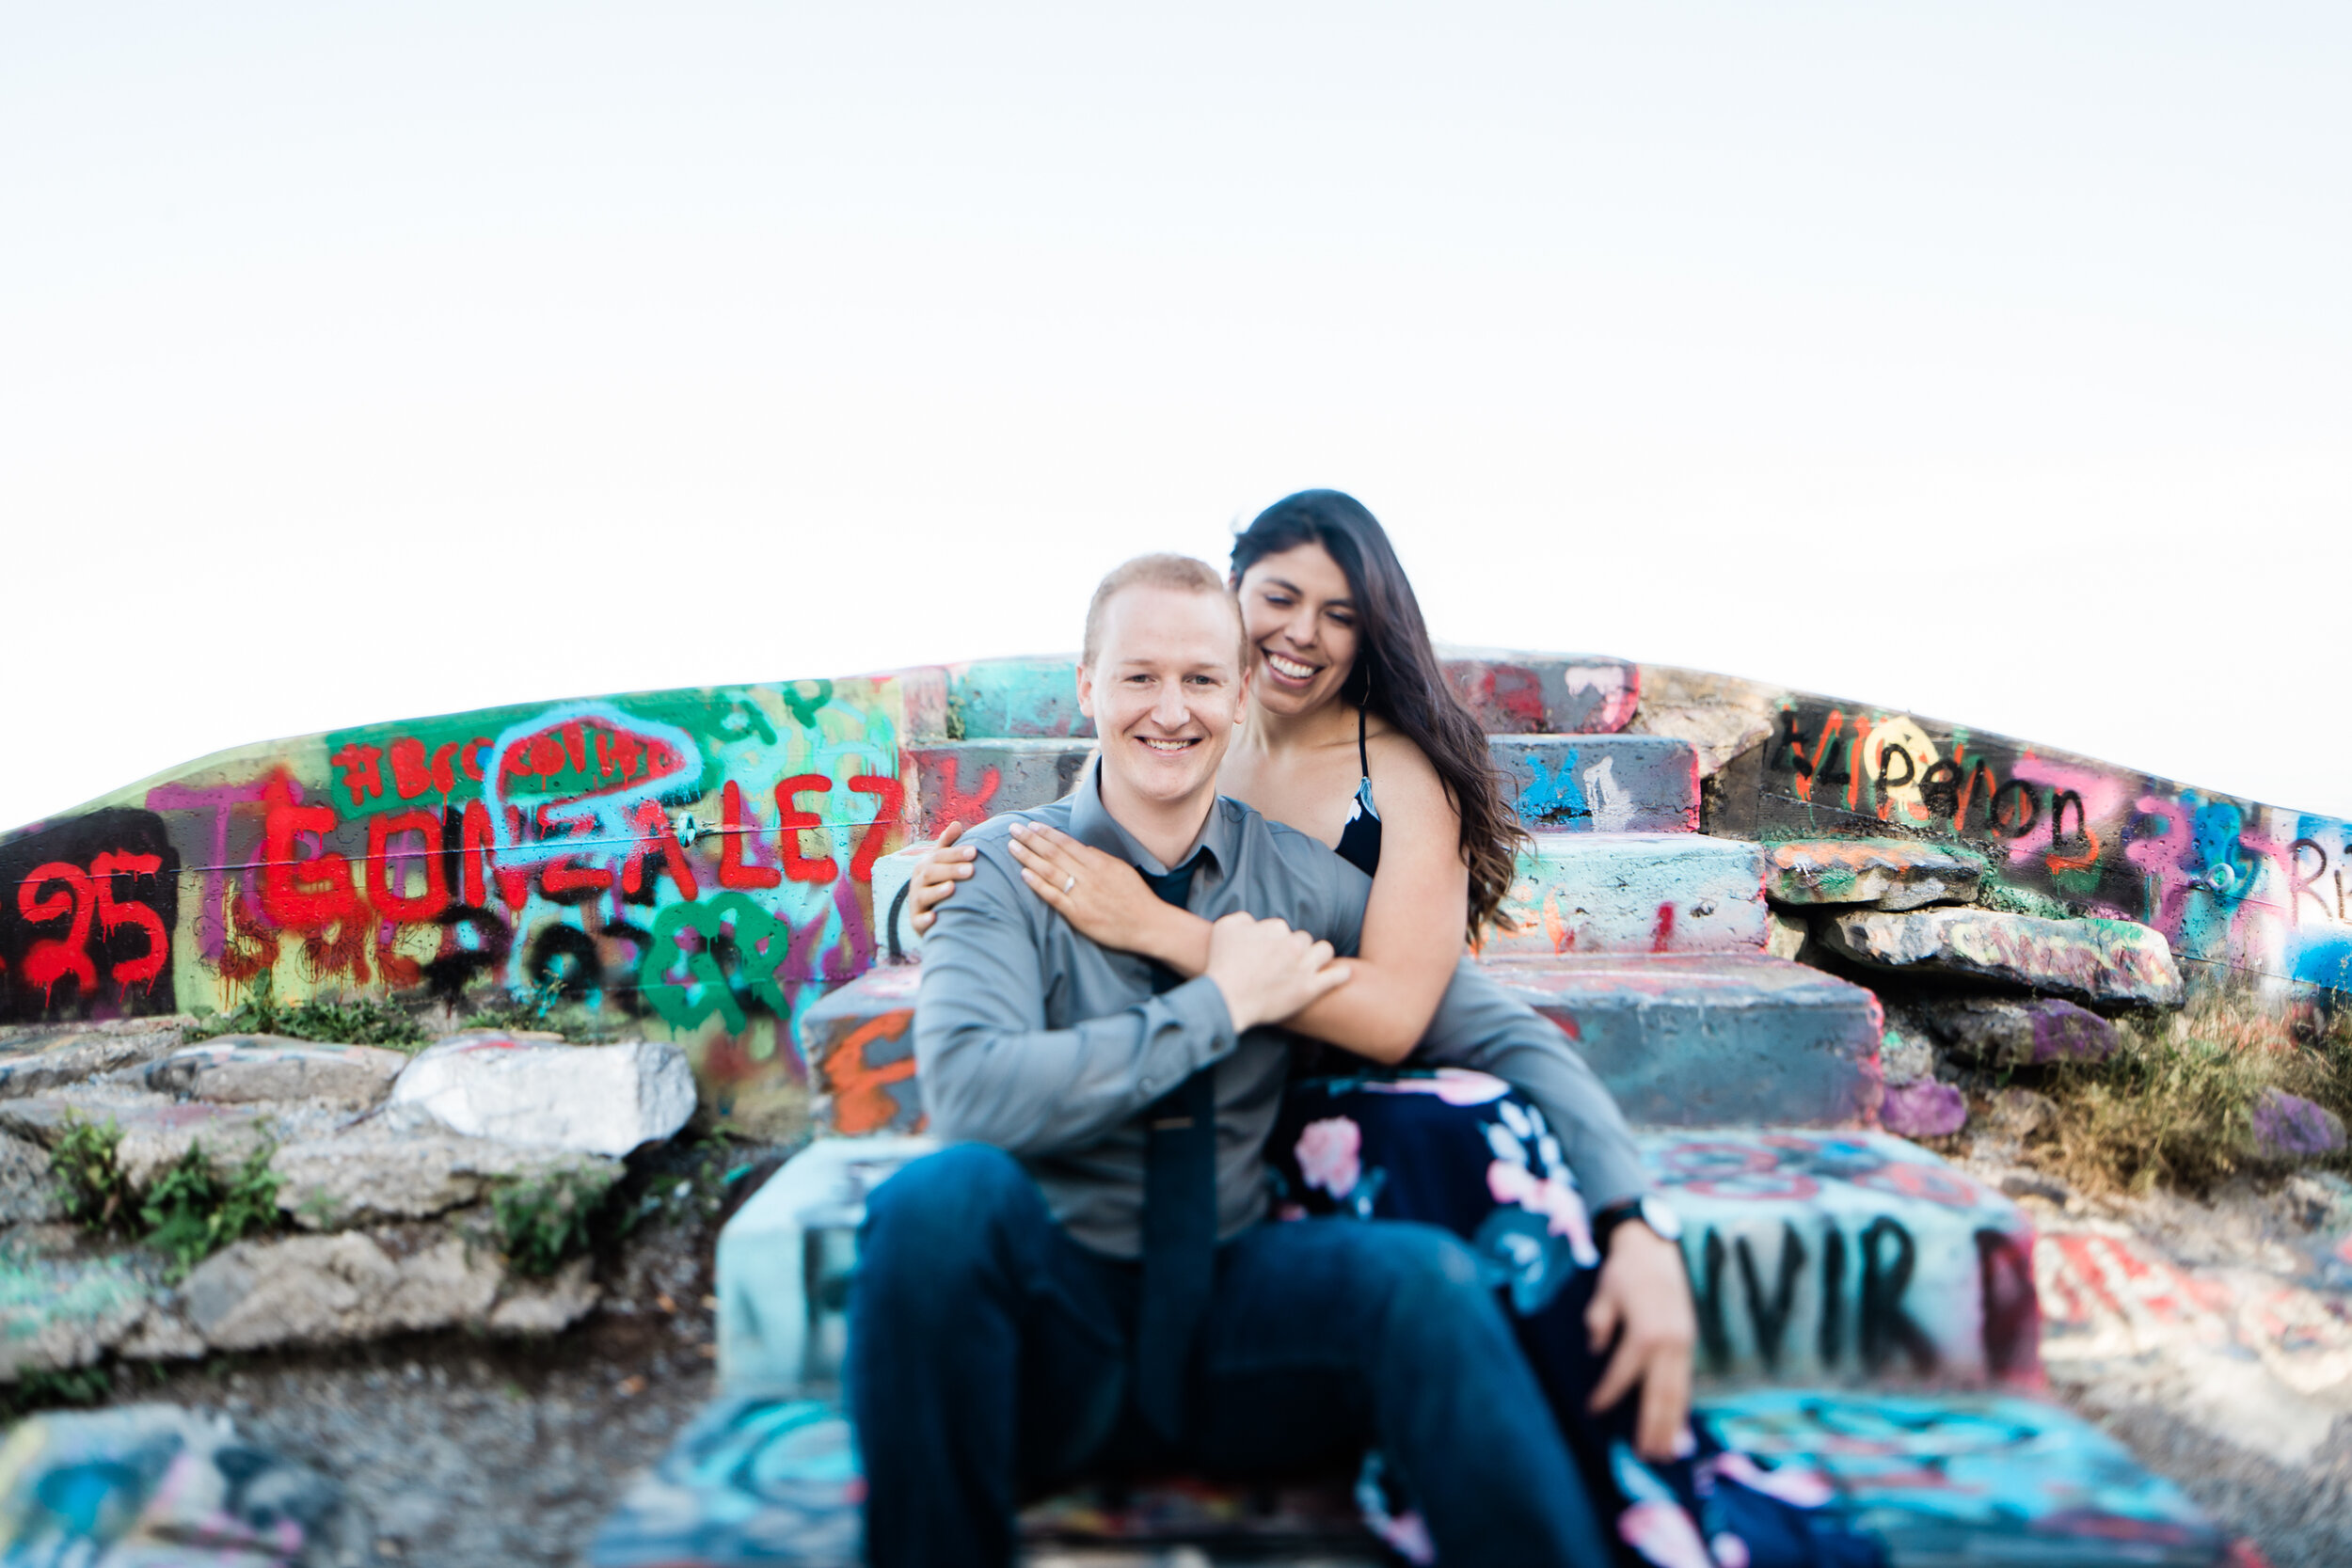 Engagement Session at High Rock Mountain in Western Maryland by Megapixels Media Photography best husband and wife wedding photographers-11.jpg